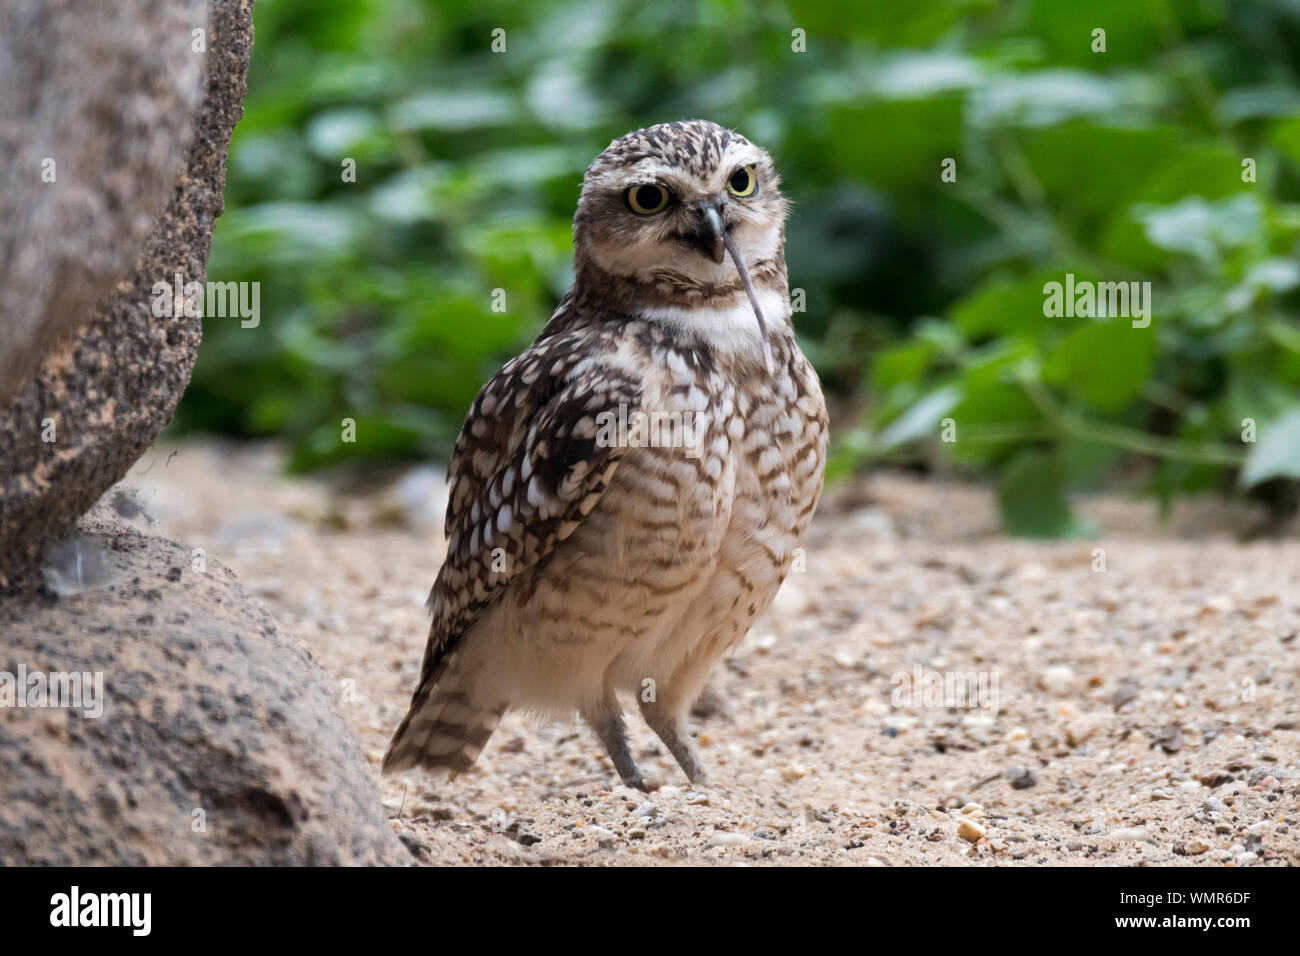 Burrowing owl (Athene cunicularia) swallowing rodent / rat, native to North America and South America Stock Photo